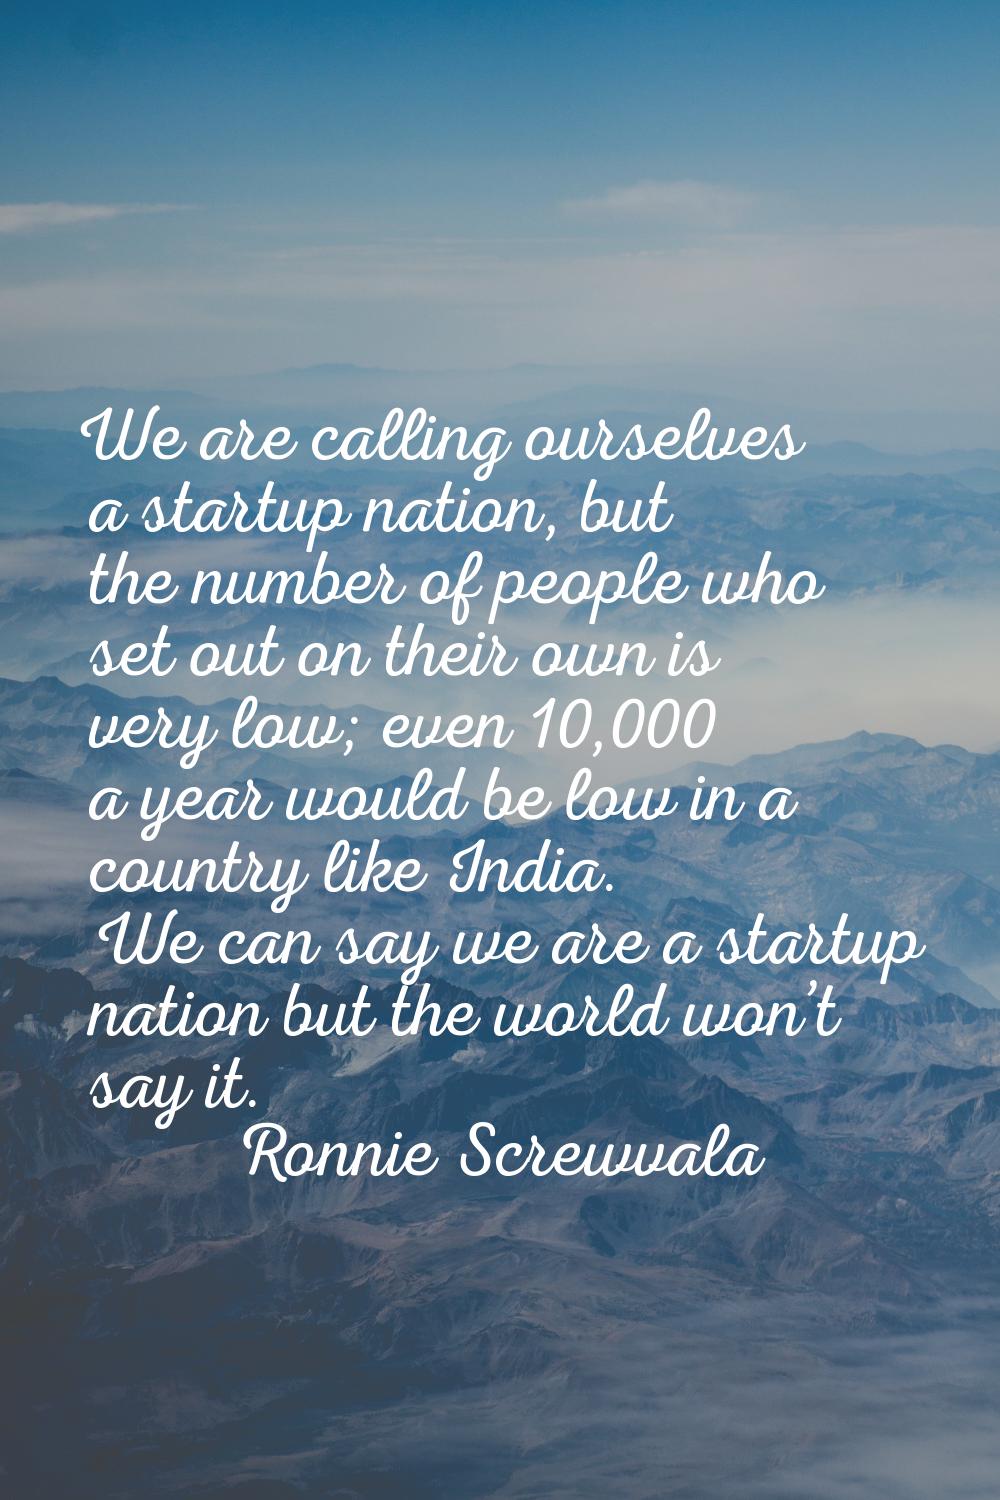 We are calling ourselves a startup nation, but the number of people who set out on their own is ver